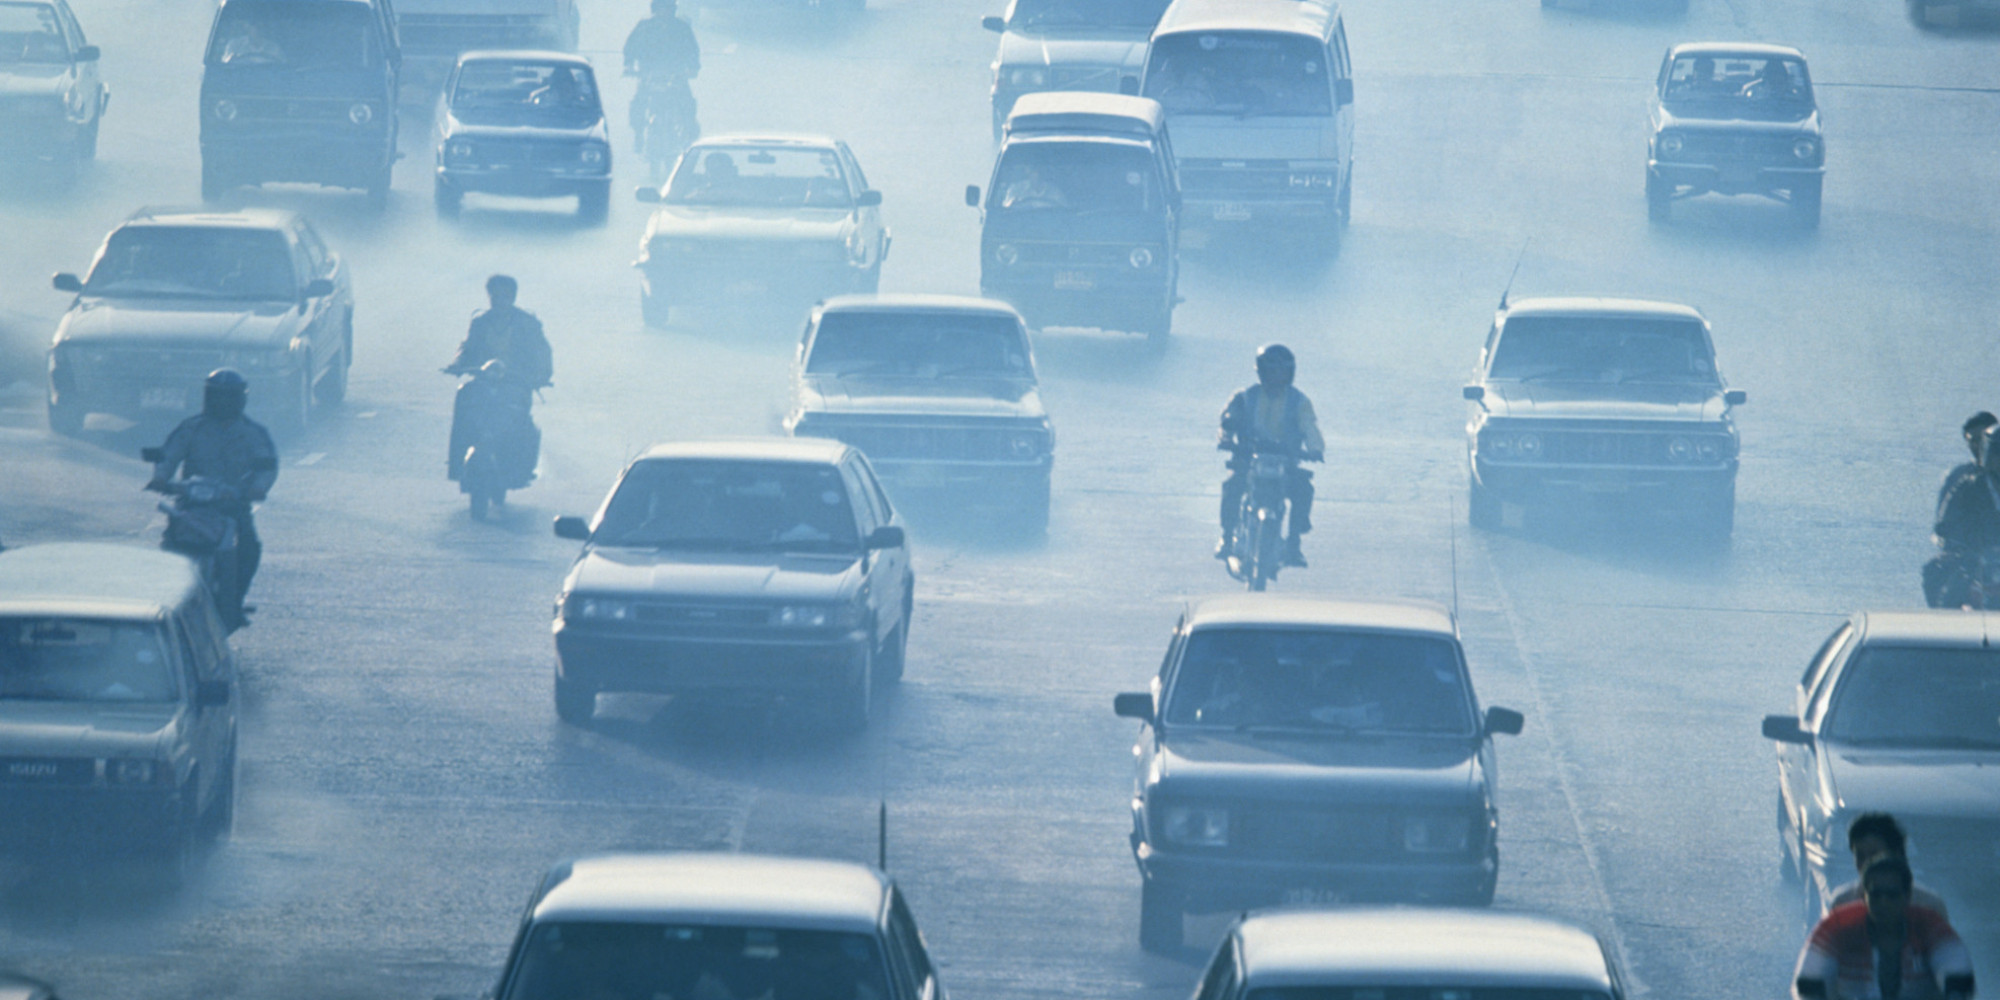 Automobile Pollution: Sources, Effects and Control of Automobile Pollution